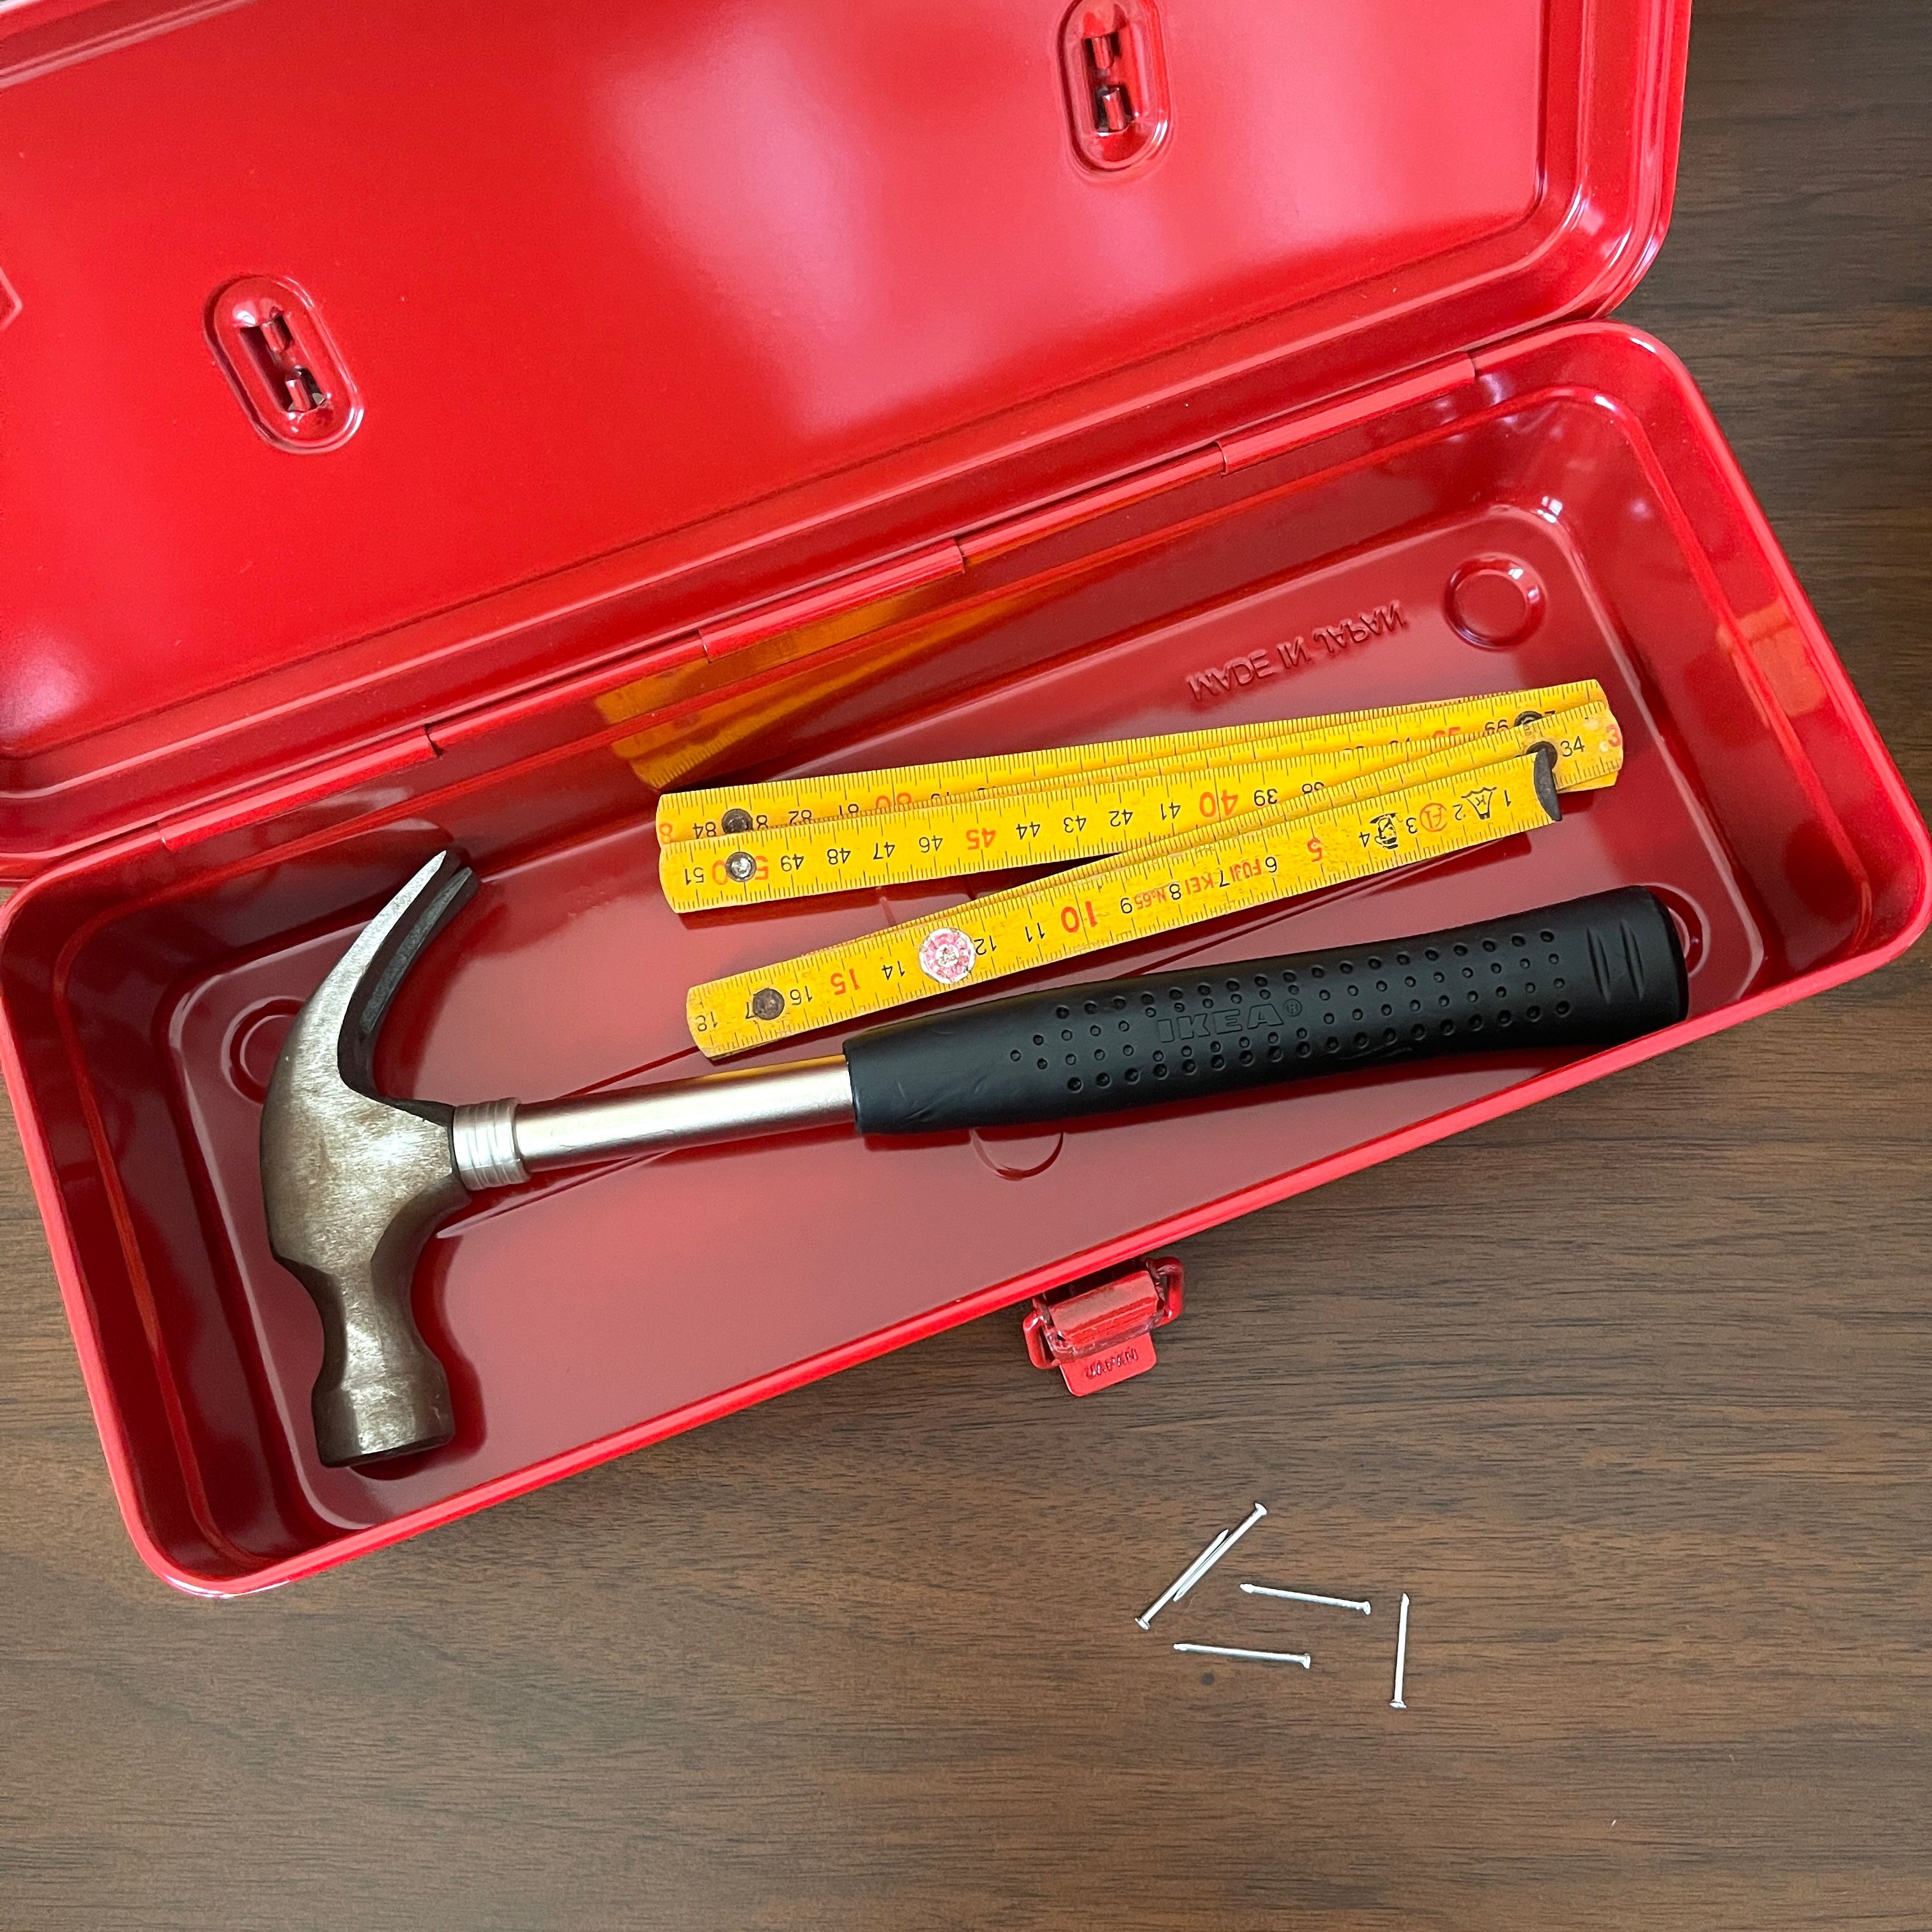 TOYO STEEL - Camber-top Toolbox Y-350 R (Red) – KOHEZI